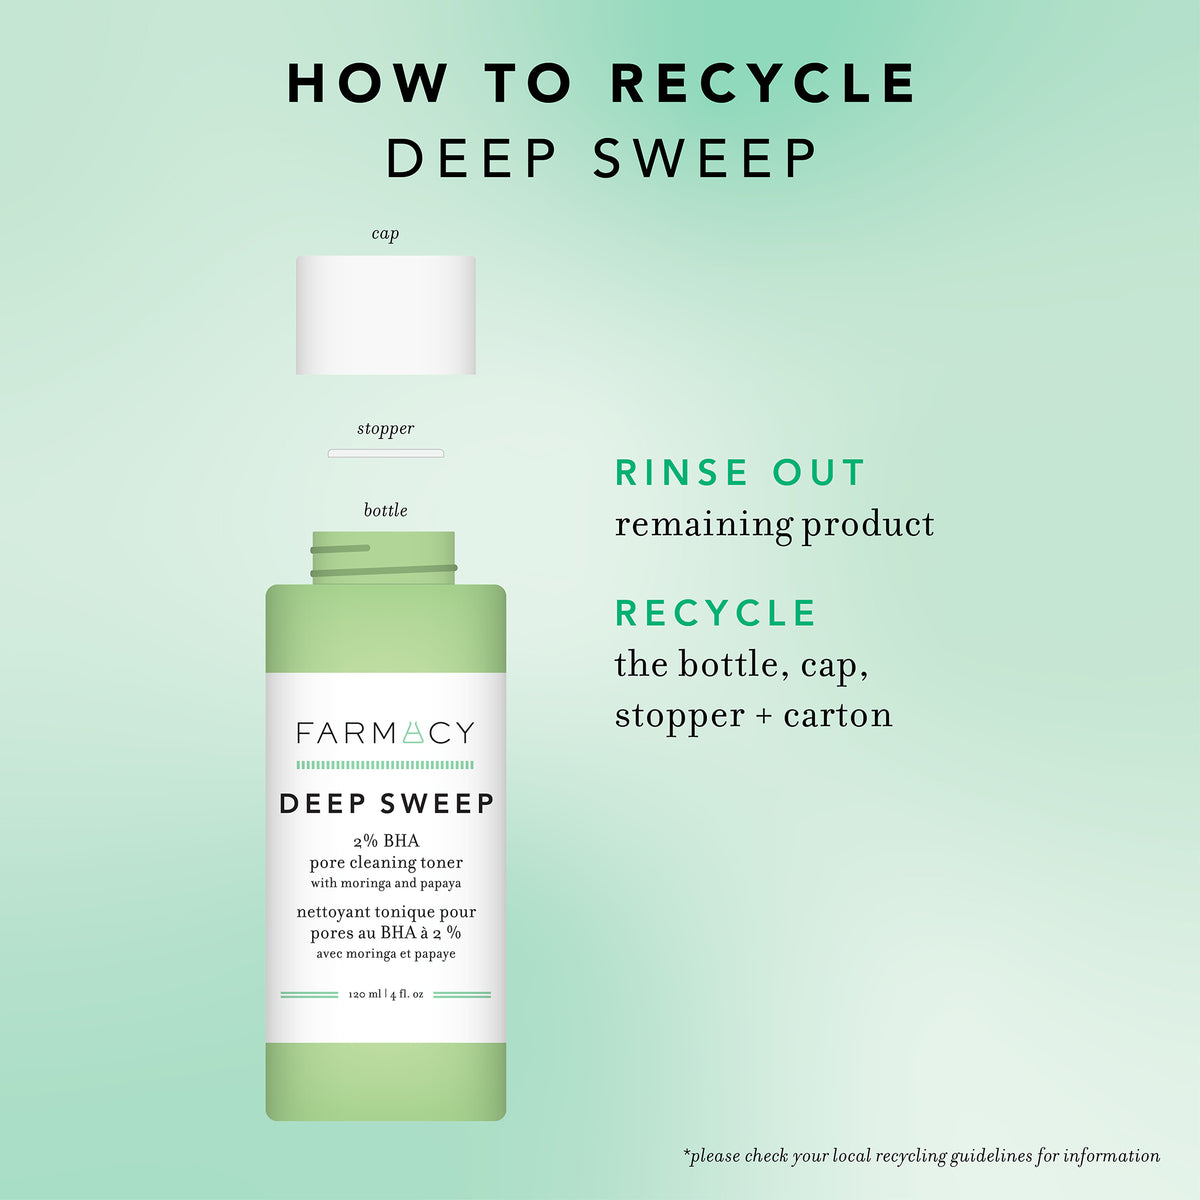 How to recycle Deep Sweep